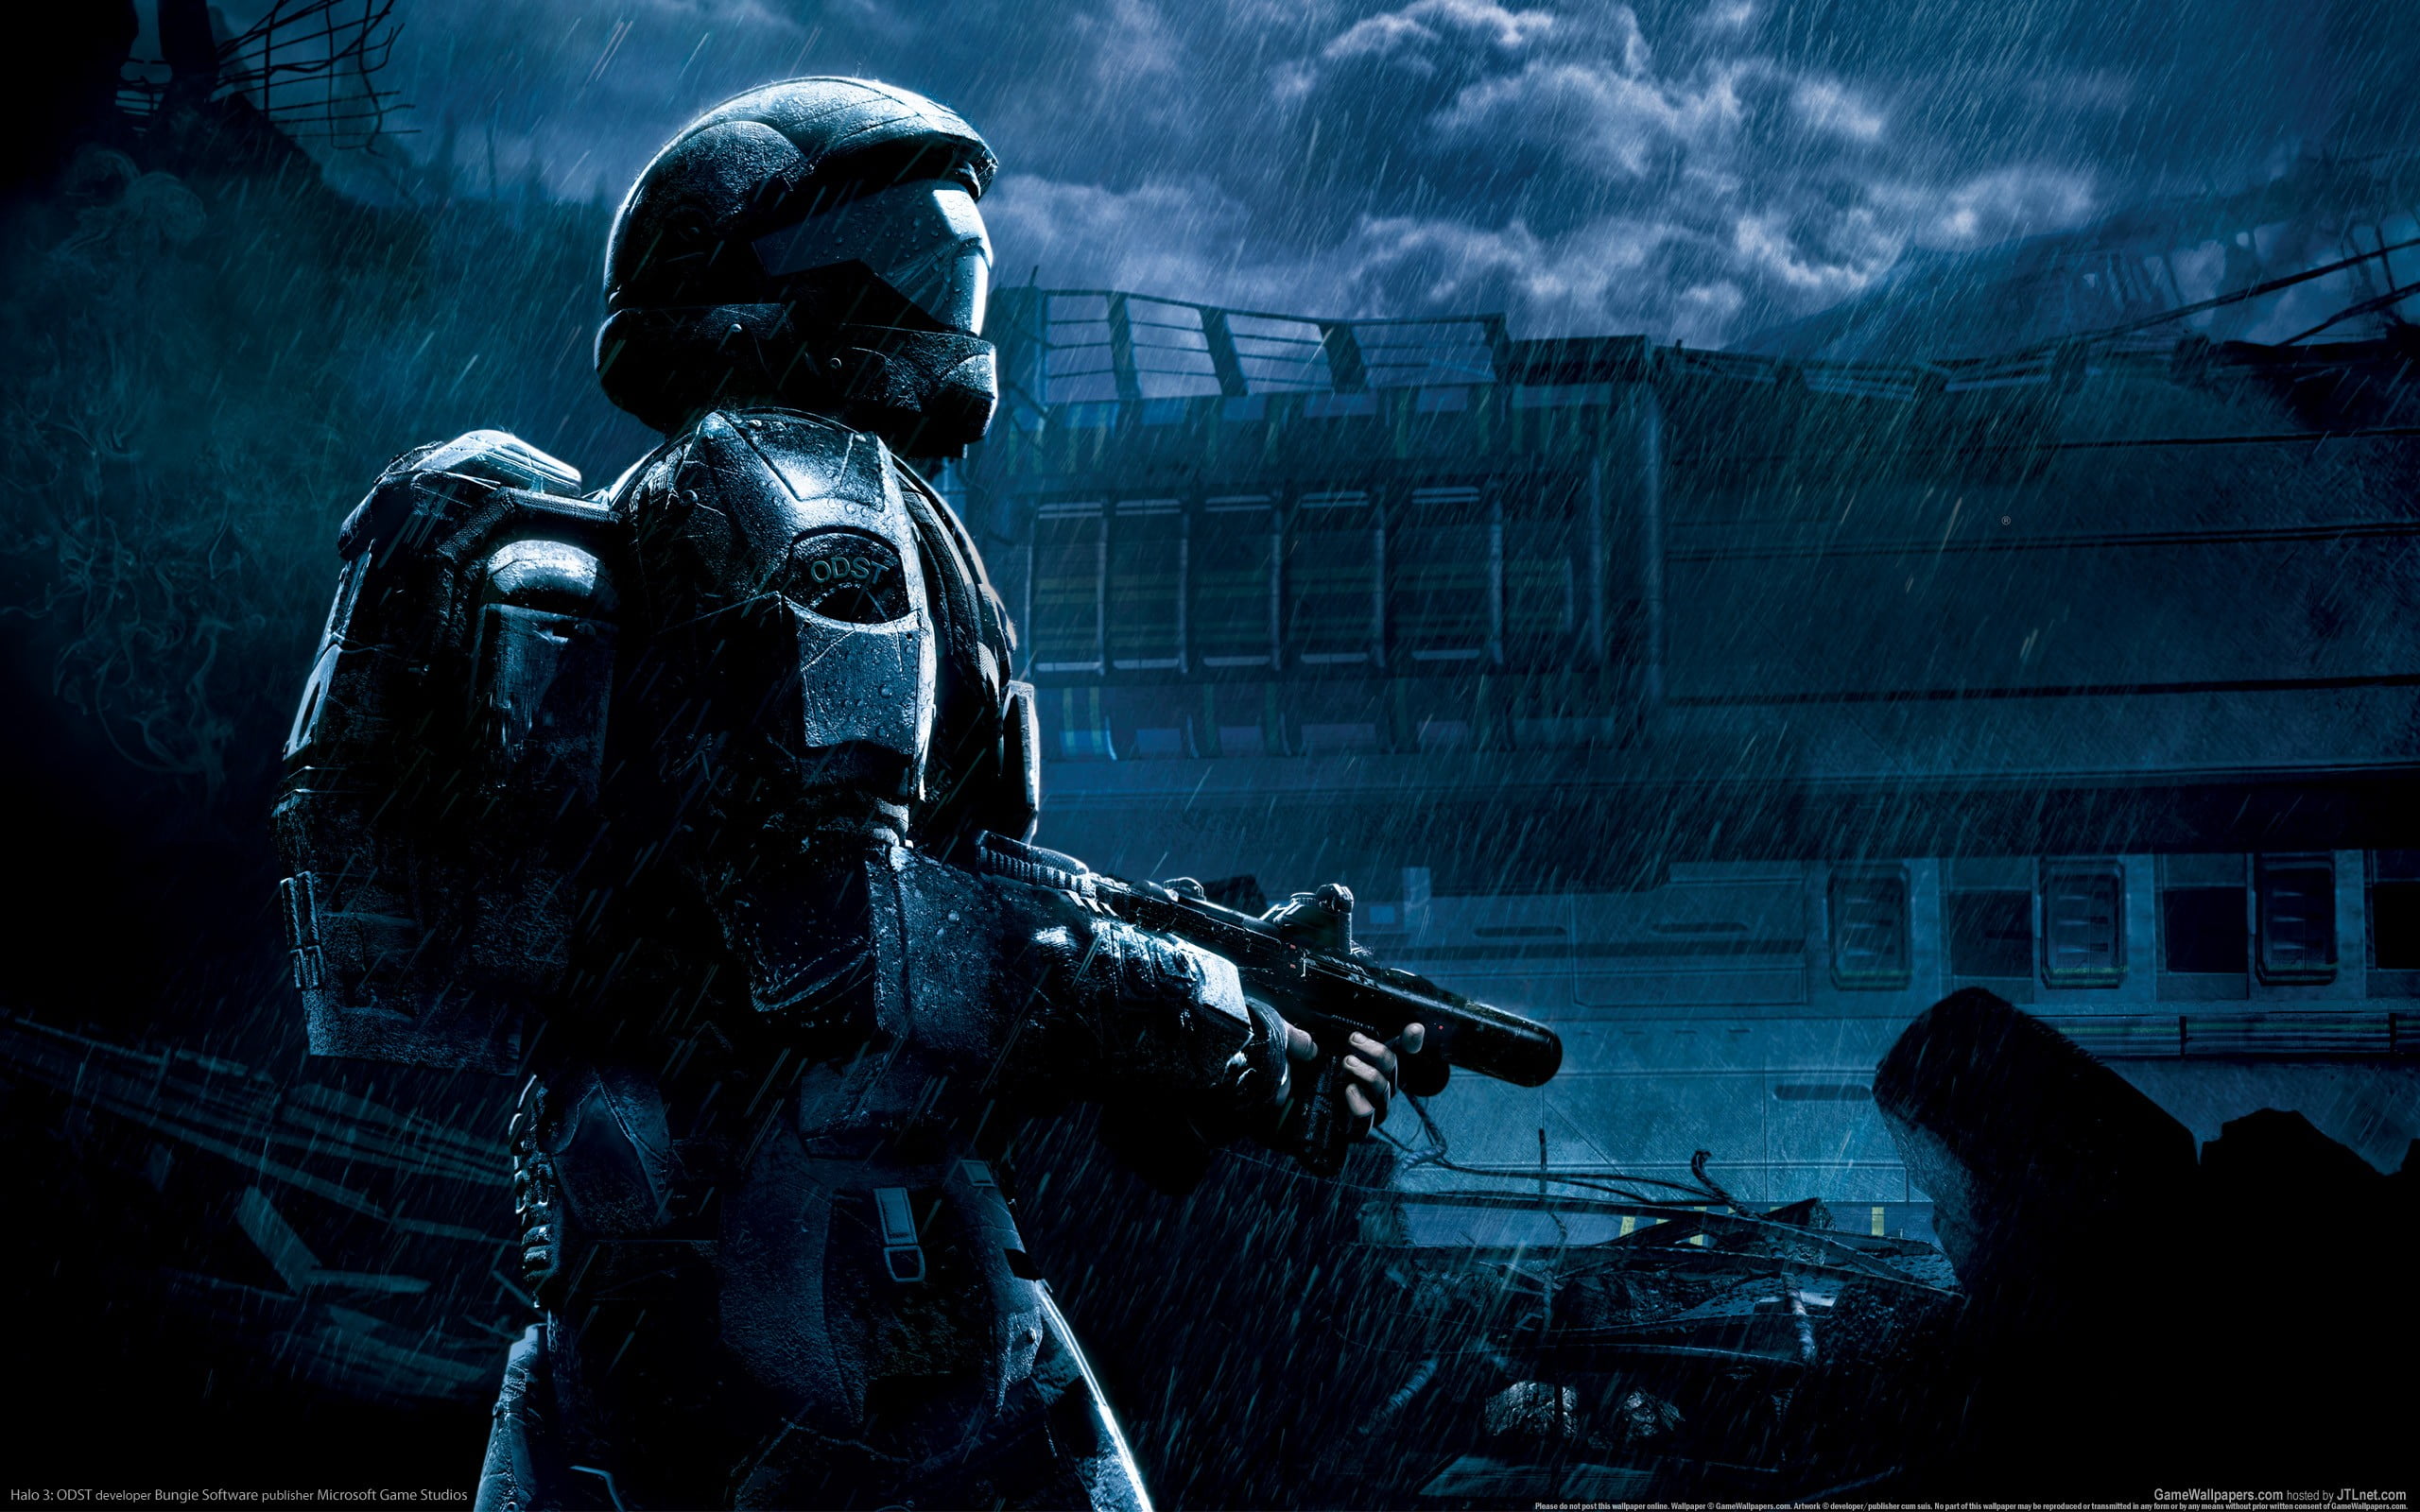 Halo digital game wallpaper, Halo 3: ODST, video games, architecture